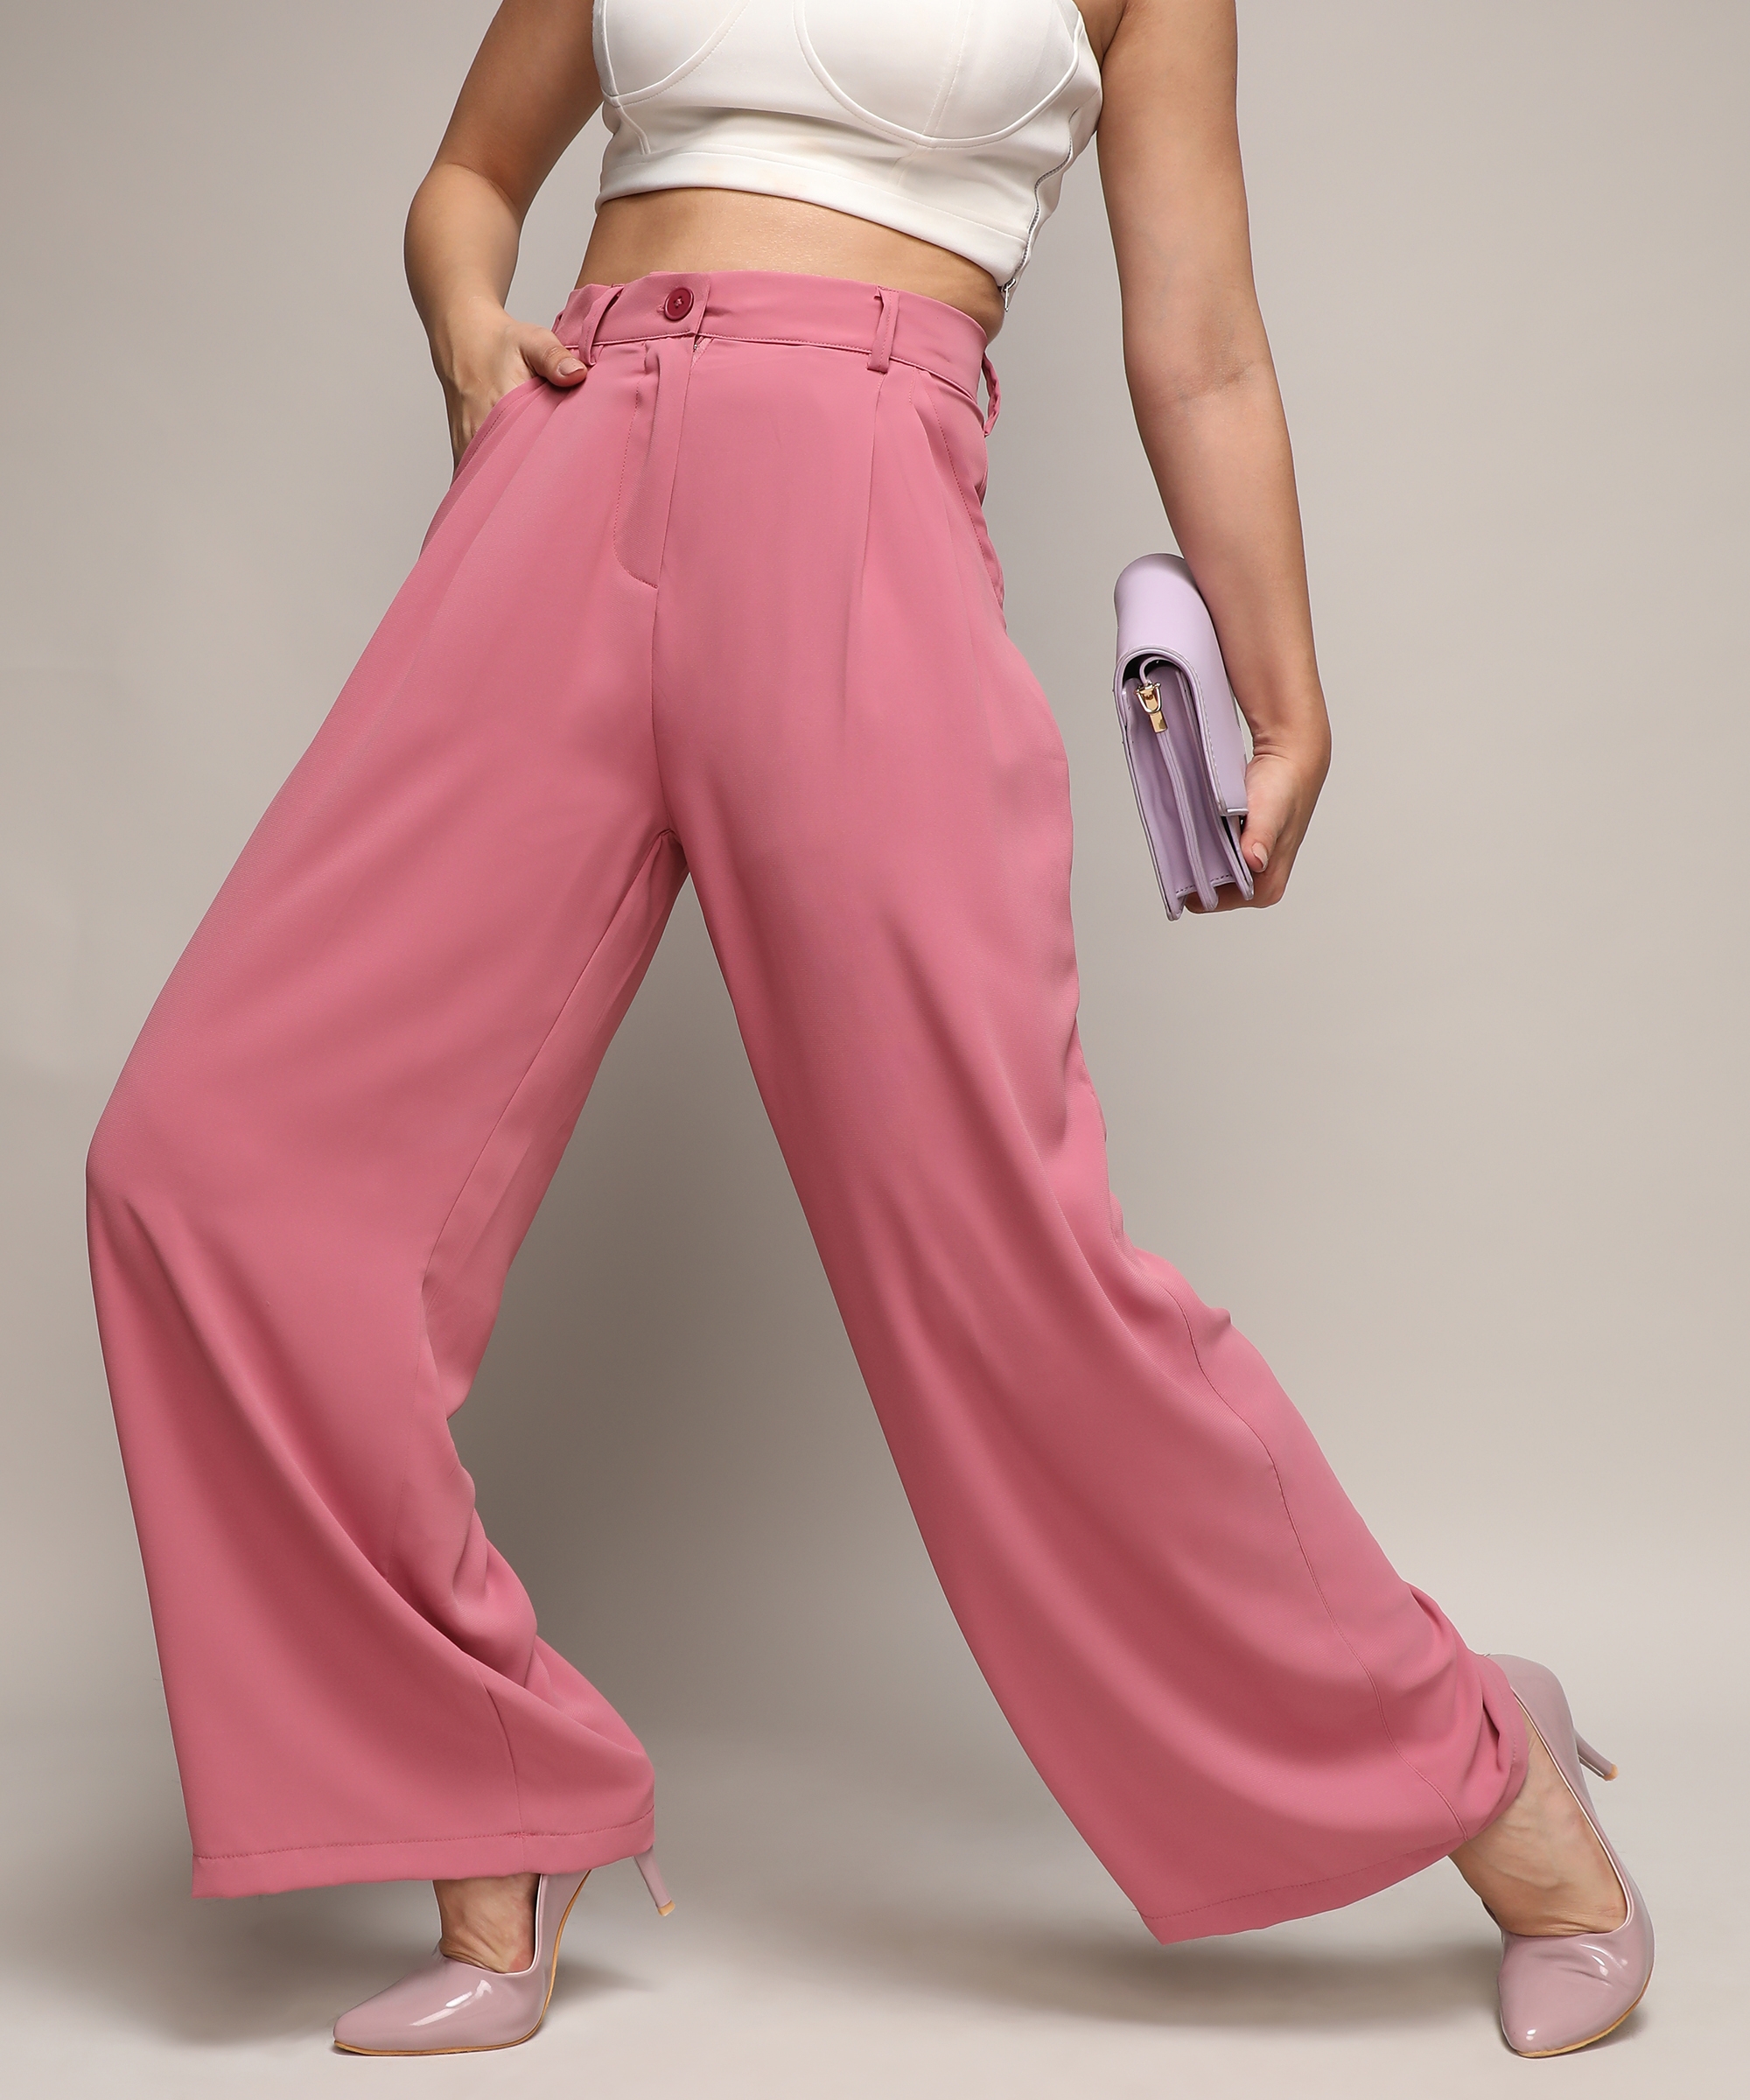 Women's Salmon Pink Solid Trouser